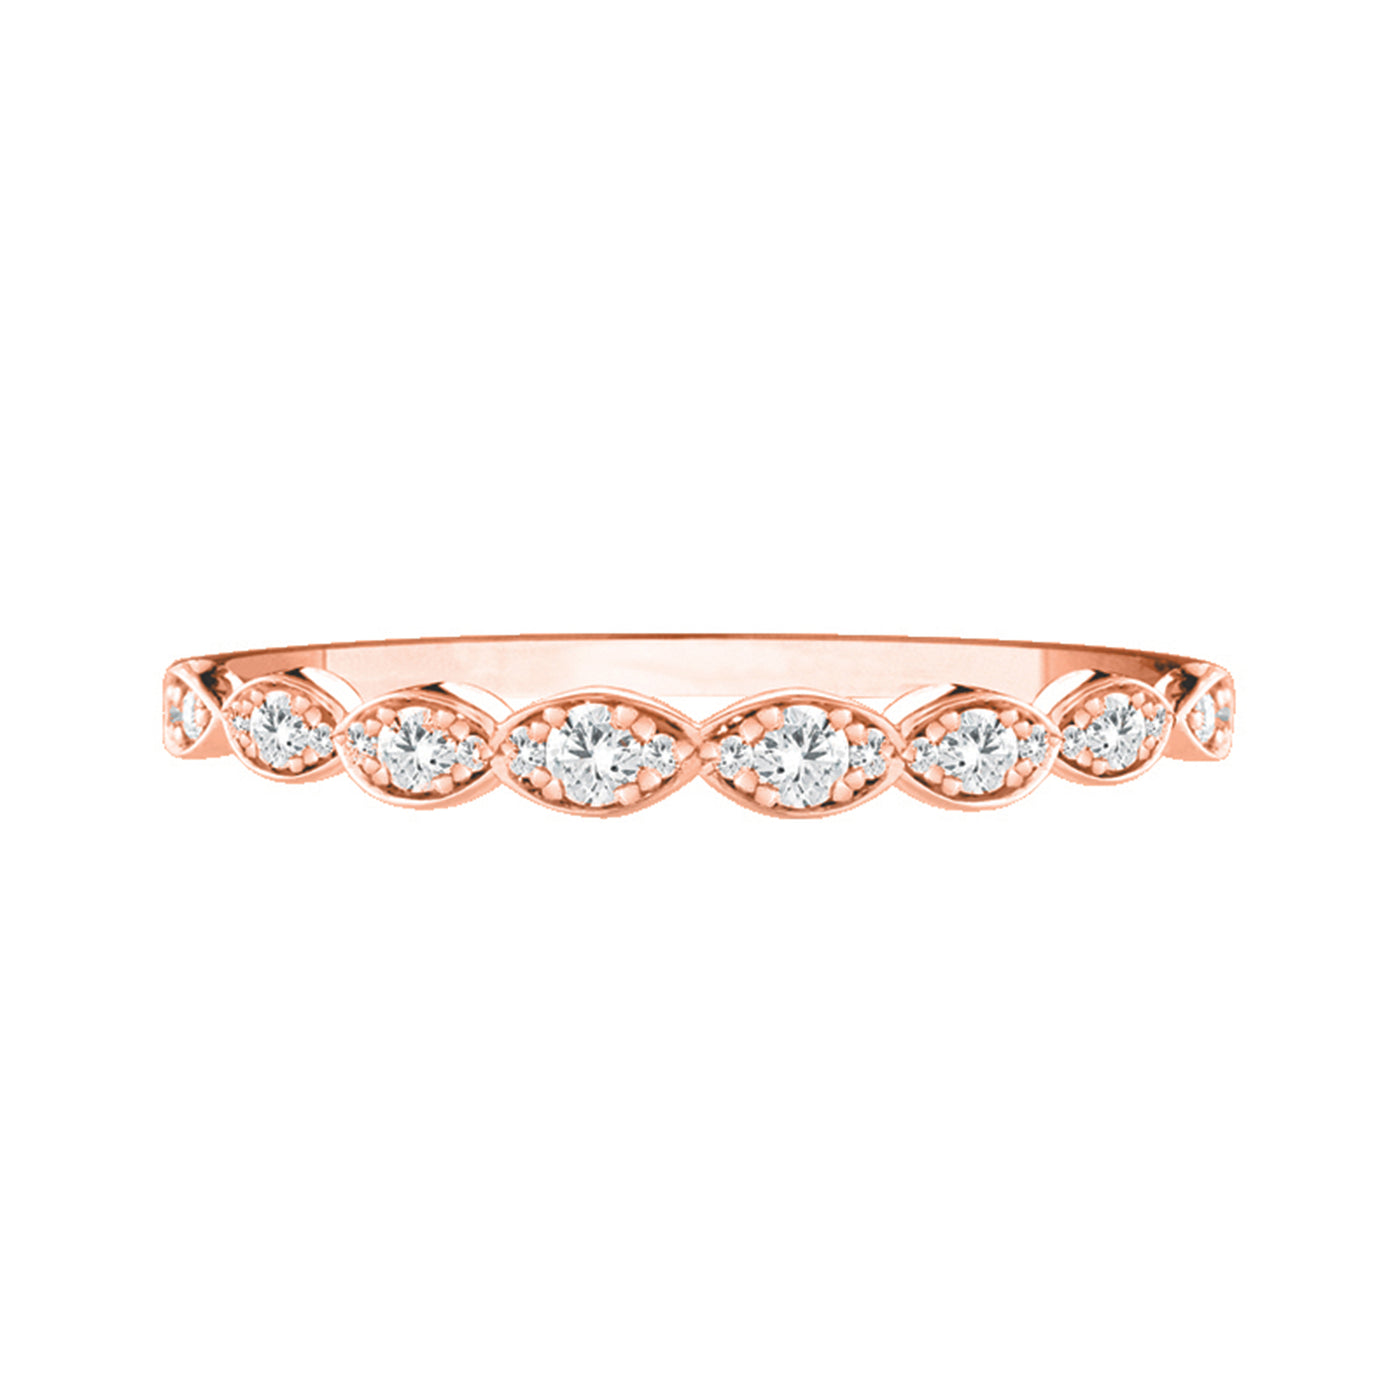 18ct rose gold marquise shaped Diamond wedder.